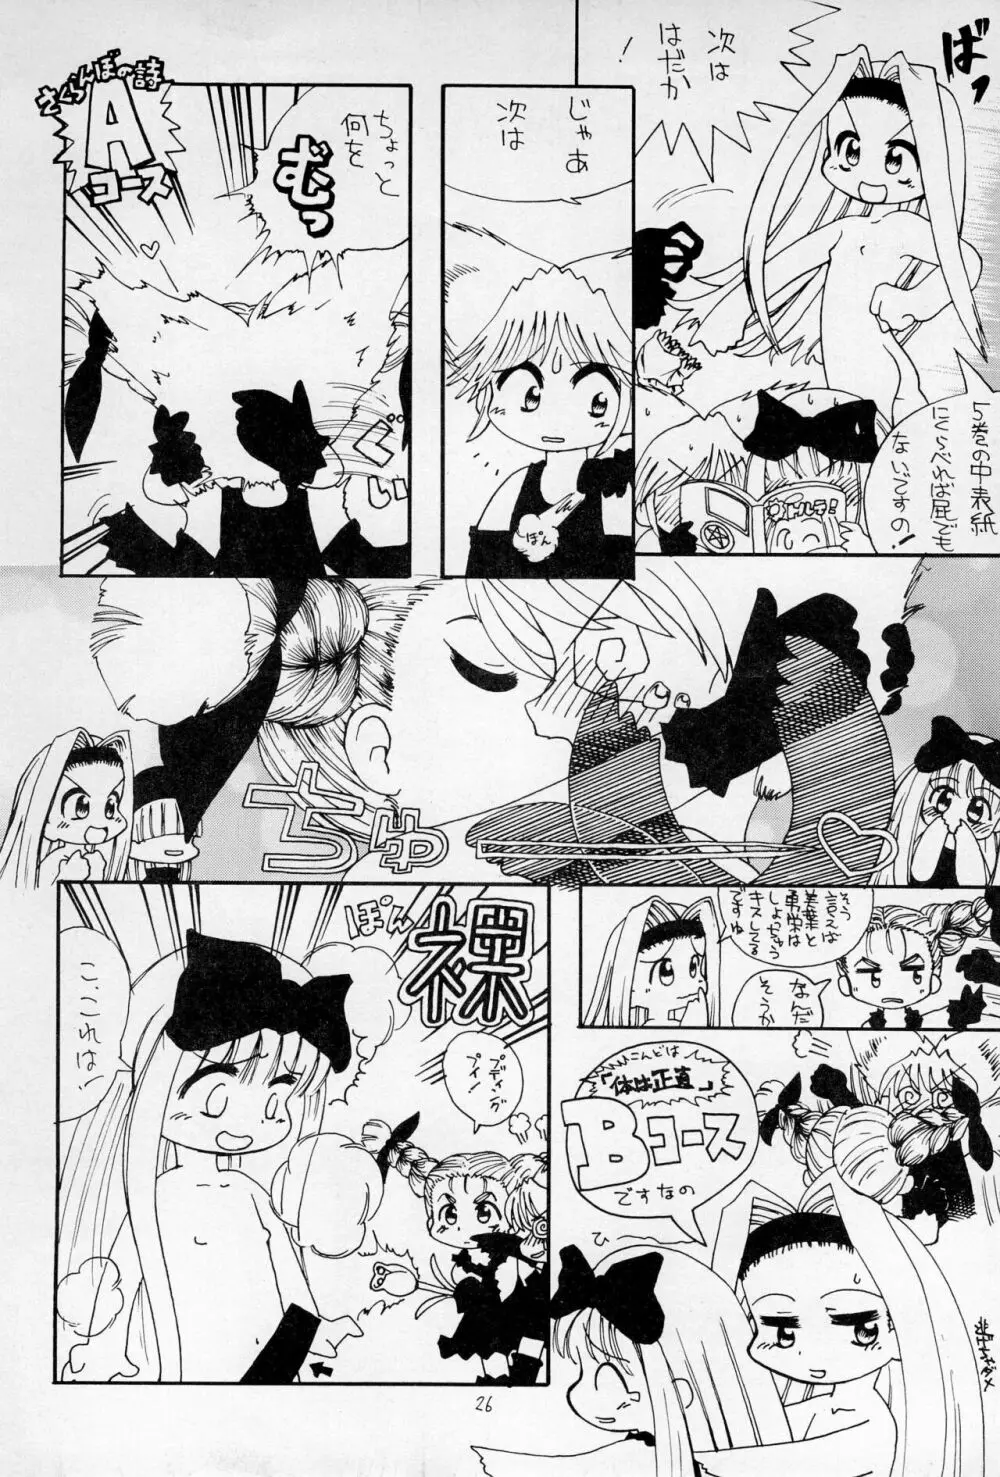 「Playroom for...」 vol.1 - page28